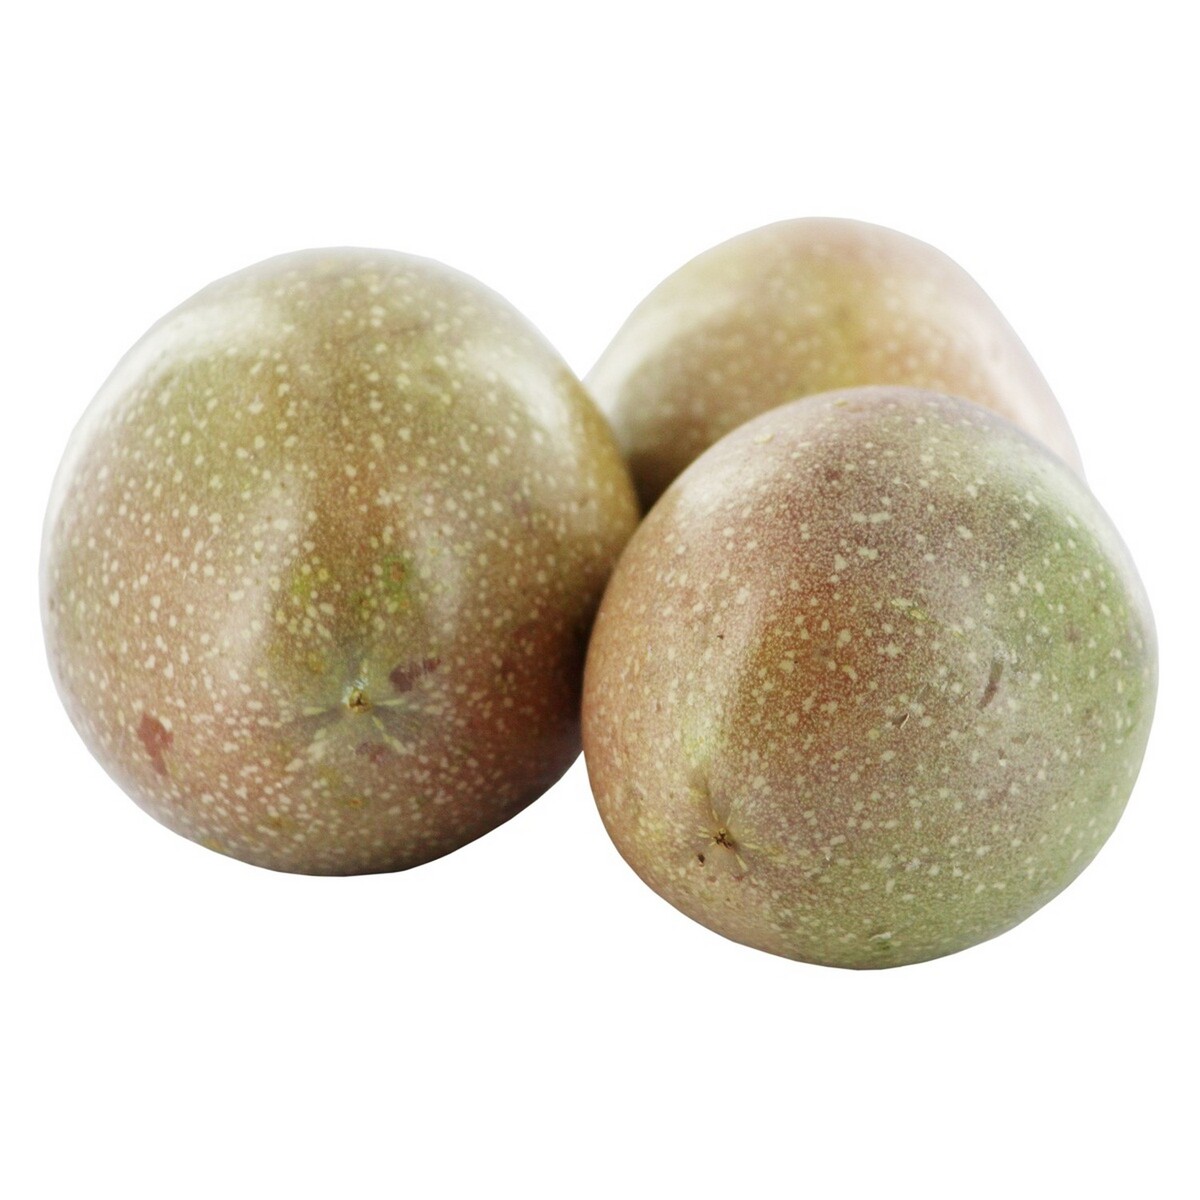 Passion Fruit  approx. 450gm-500gm